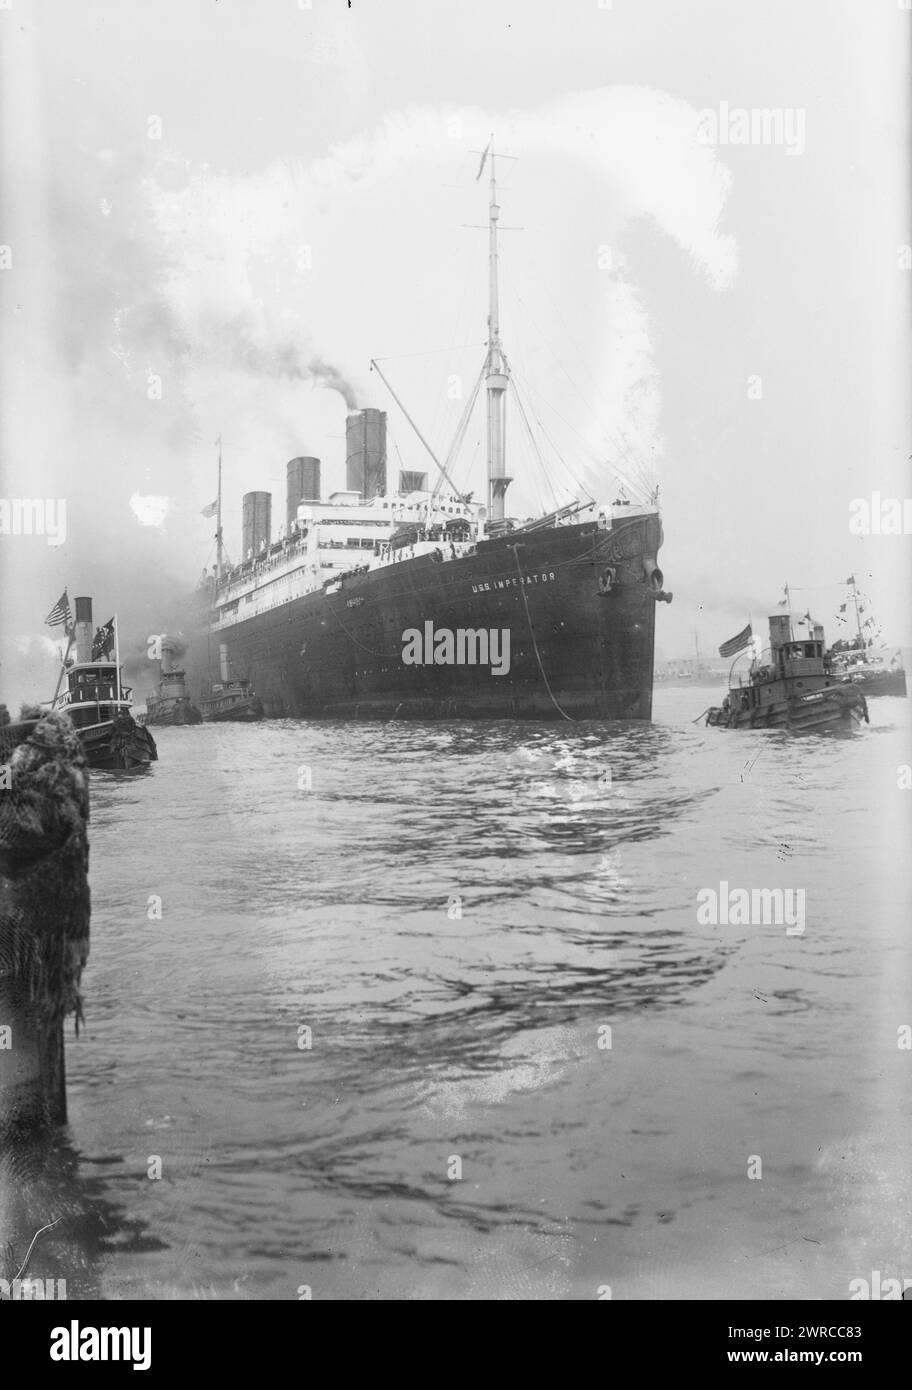 IMPERATOR, Photo shows the U. S.S. Imperator, formerly the S.S. Imperator (an ocean liner of the Hamburg America Line) during its service as a civilian transport ship returning soldiers to the United States after World War I., 1919, Glass negatives, 1 negative: glass Stock Photo